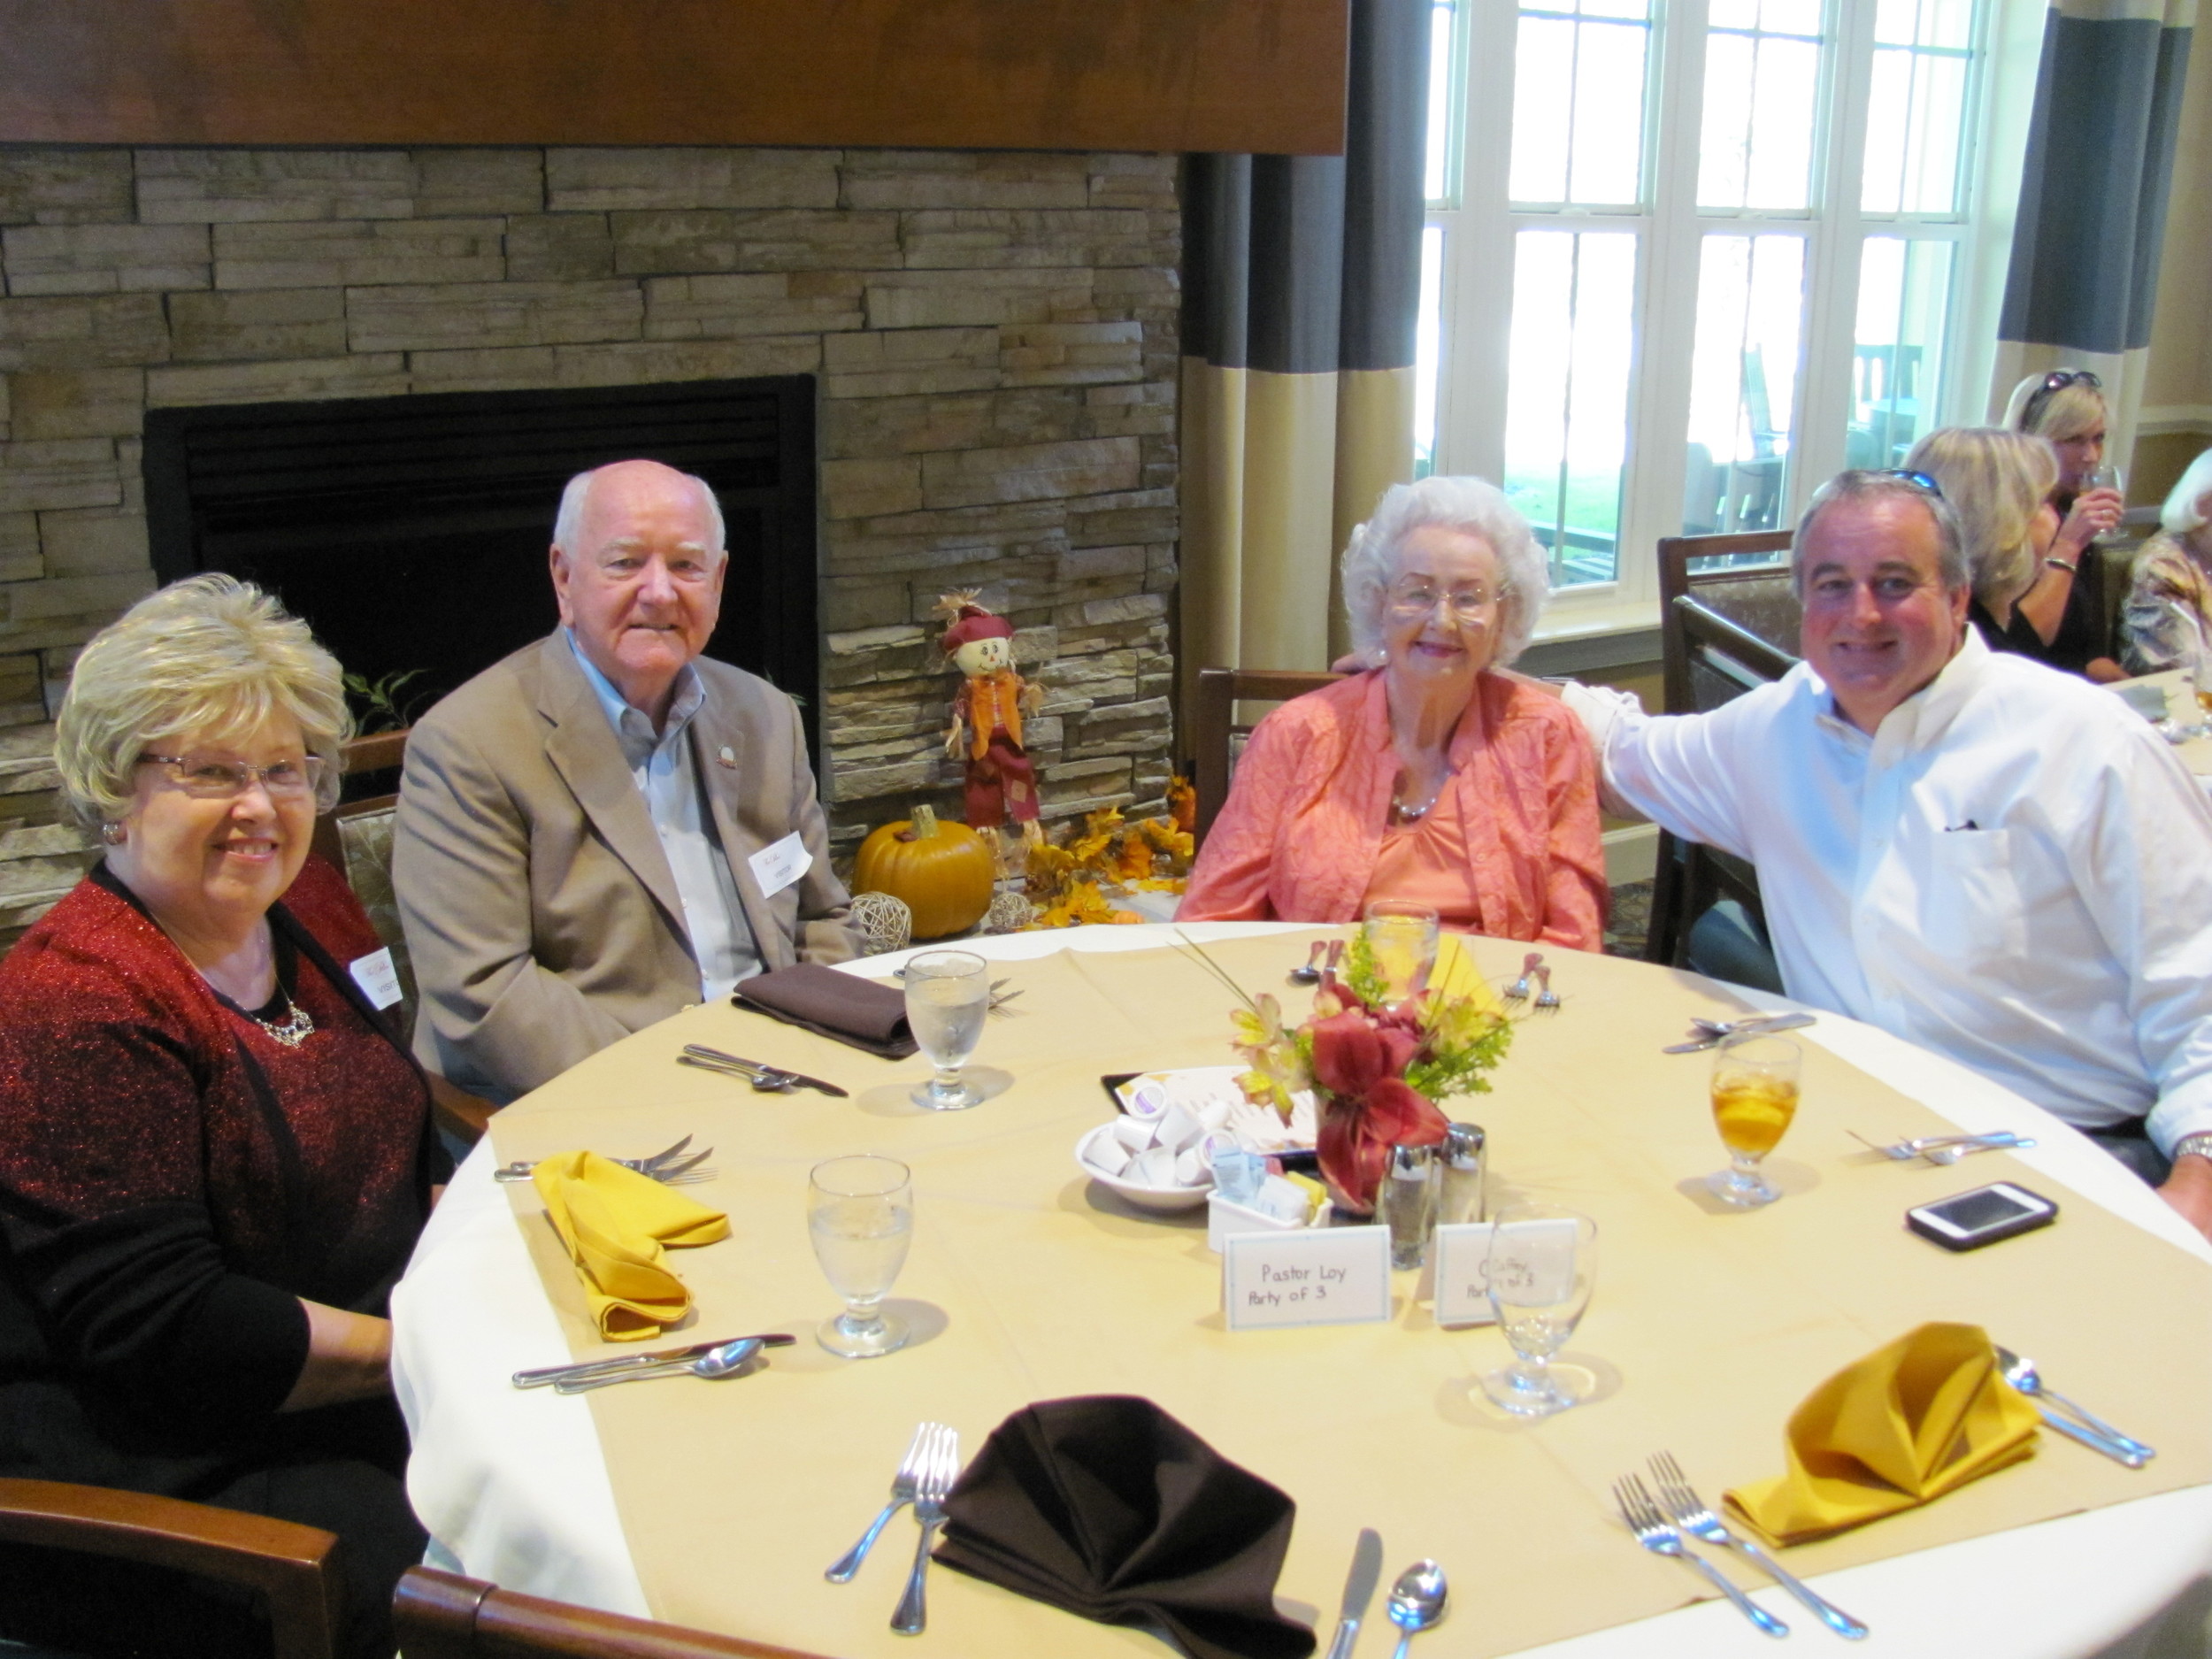 (From left to right): Anita Loy, Pastor Bob Loy, Gloria Caffey and Matty Caffey enjoy the Thanksgiving luncheon